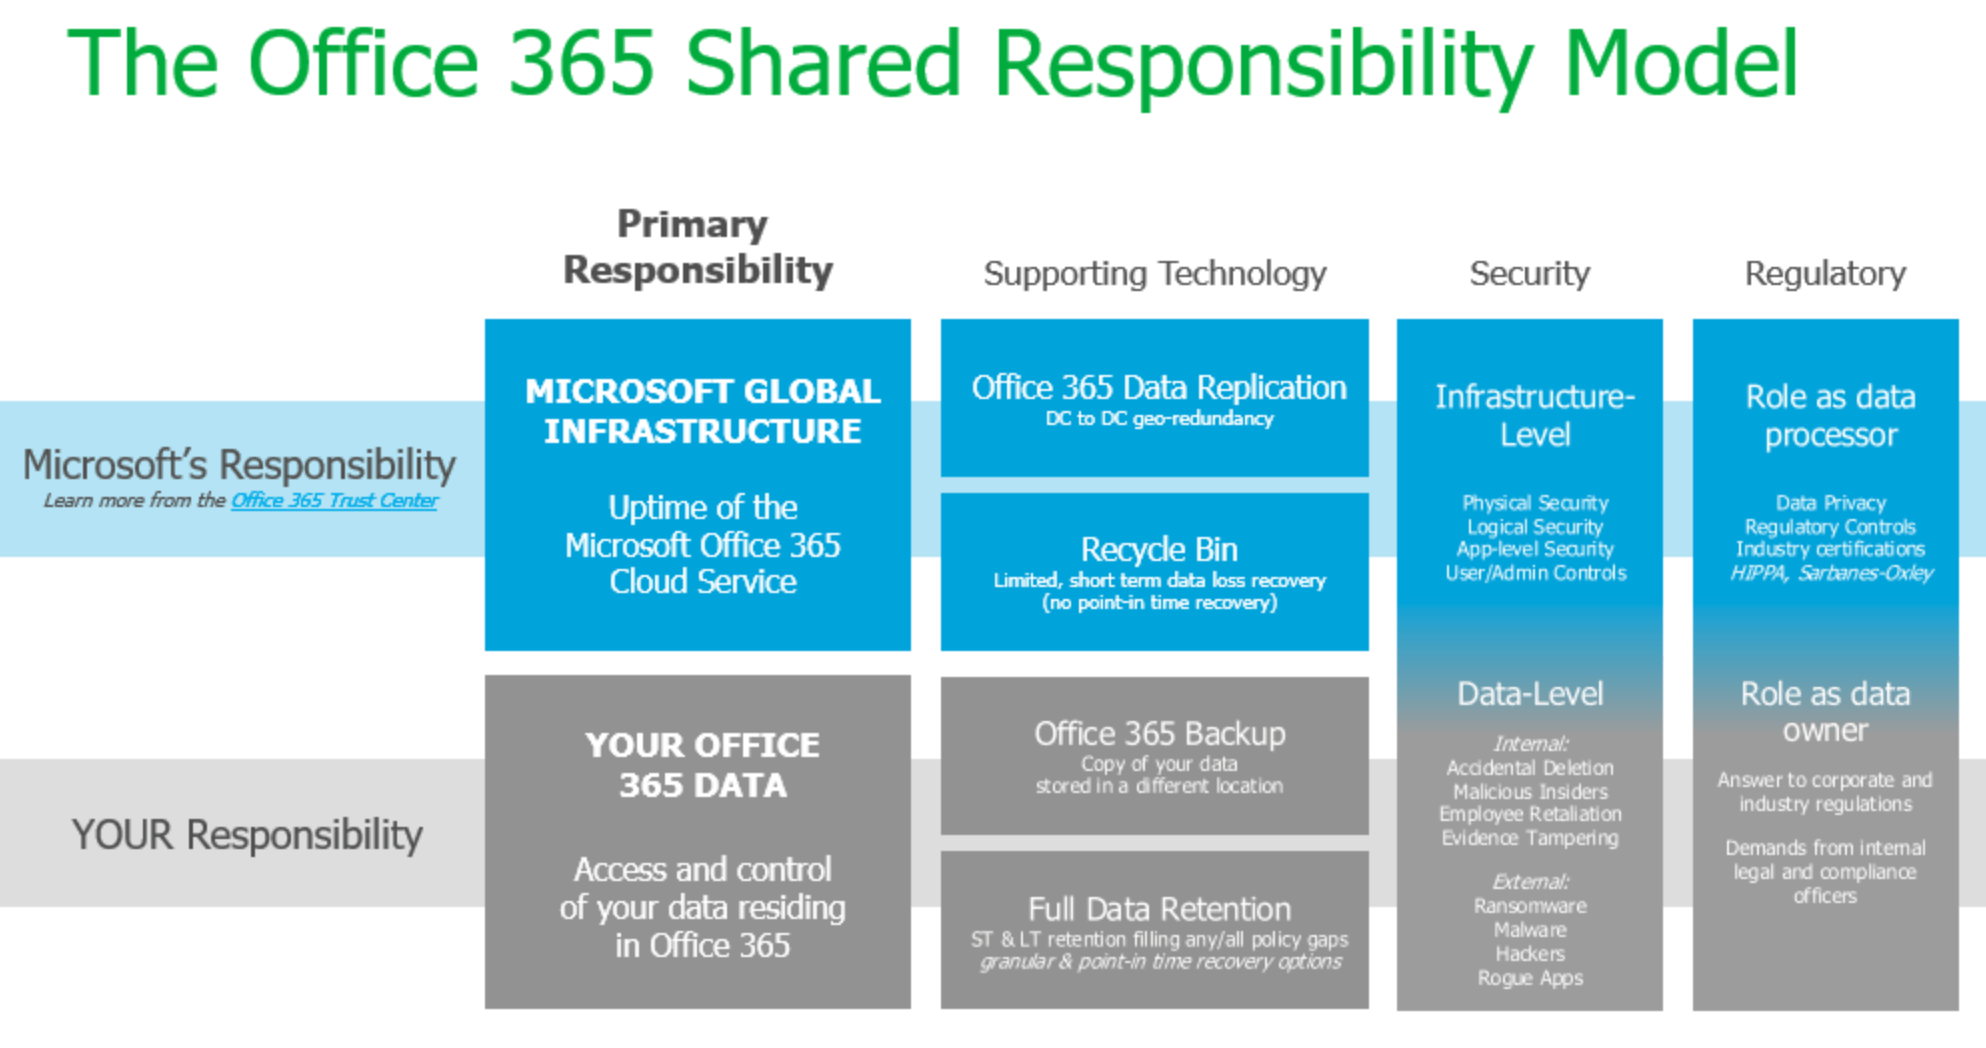 MS_office 365 Shared Responsibility Model